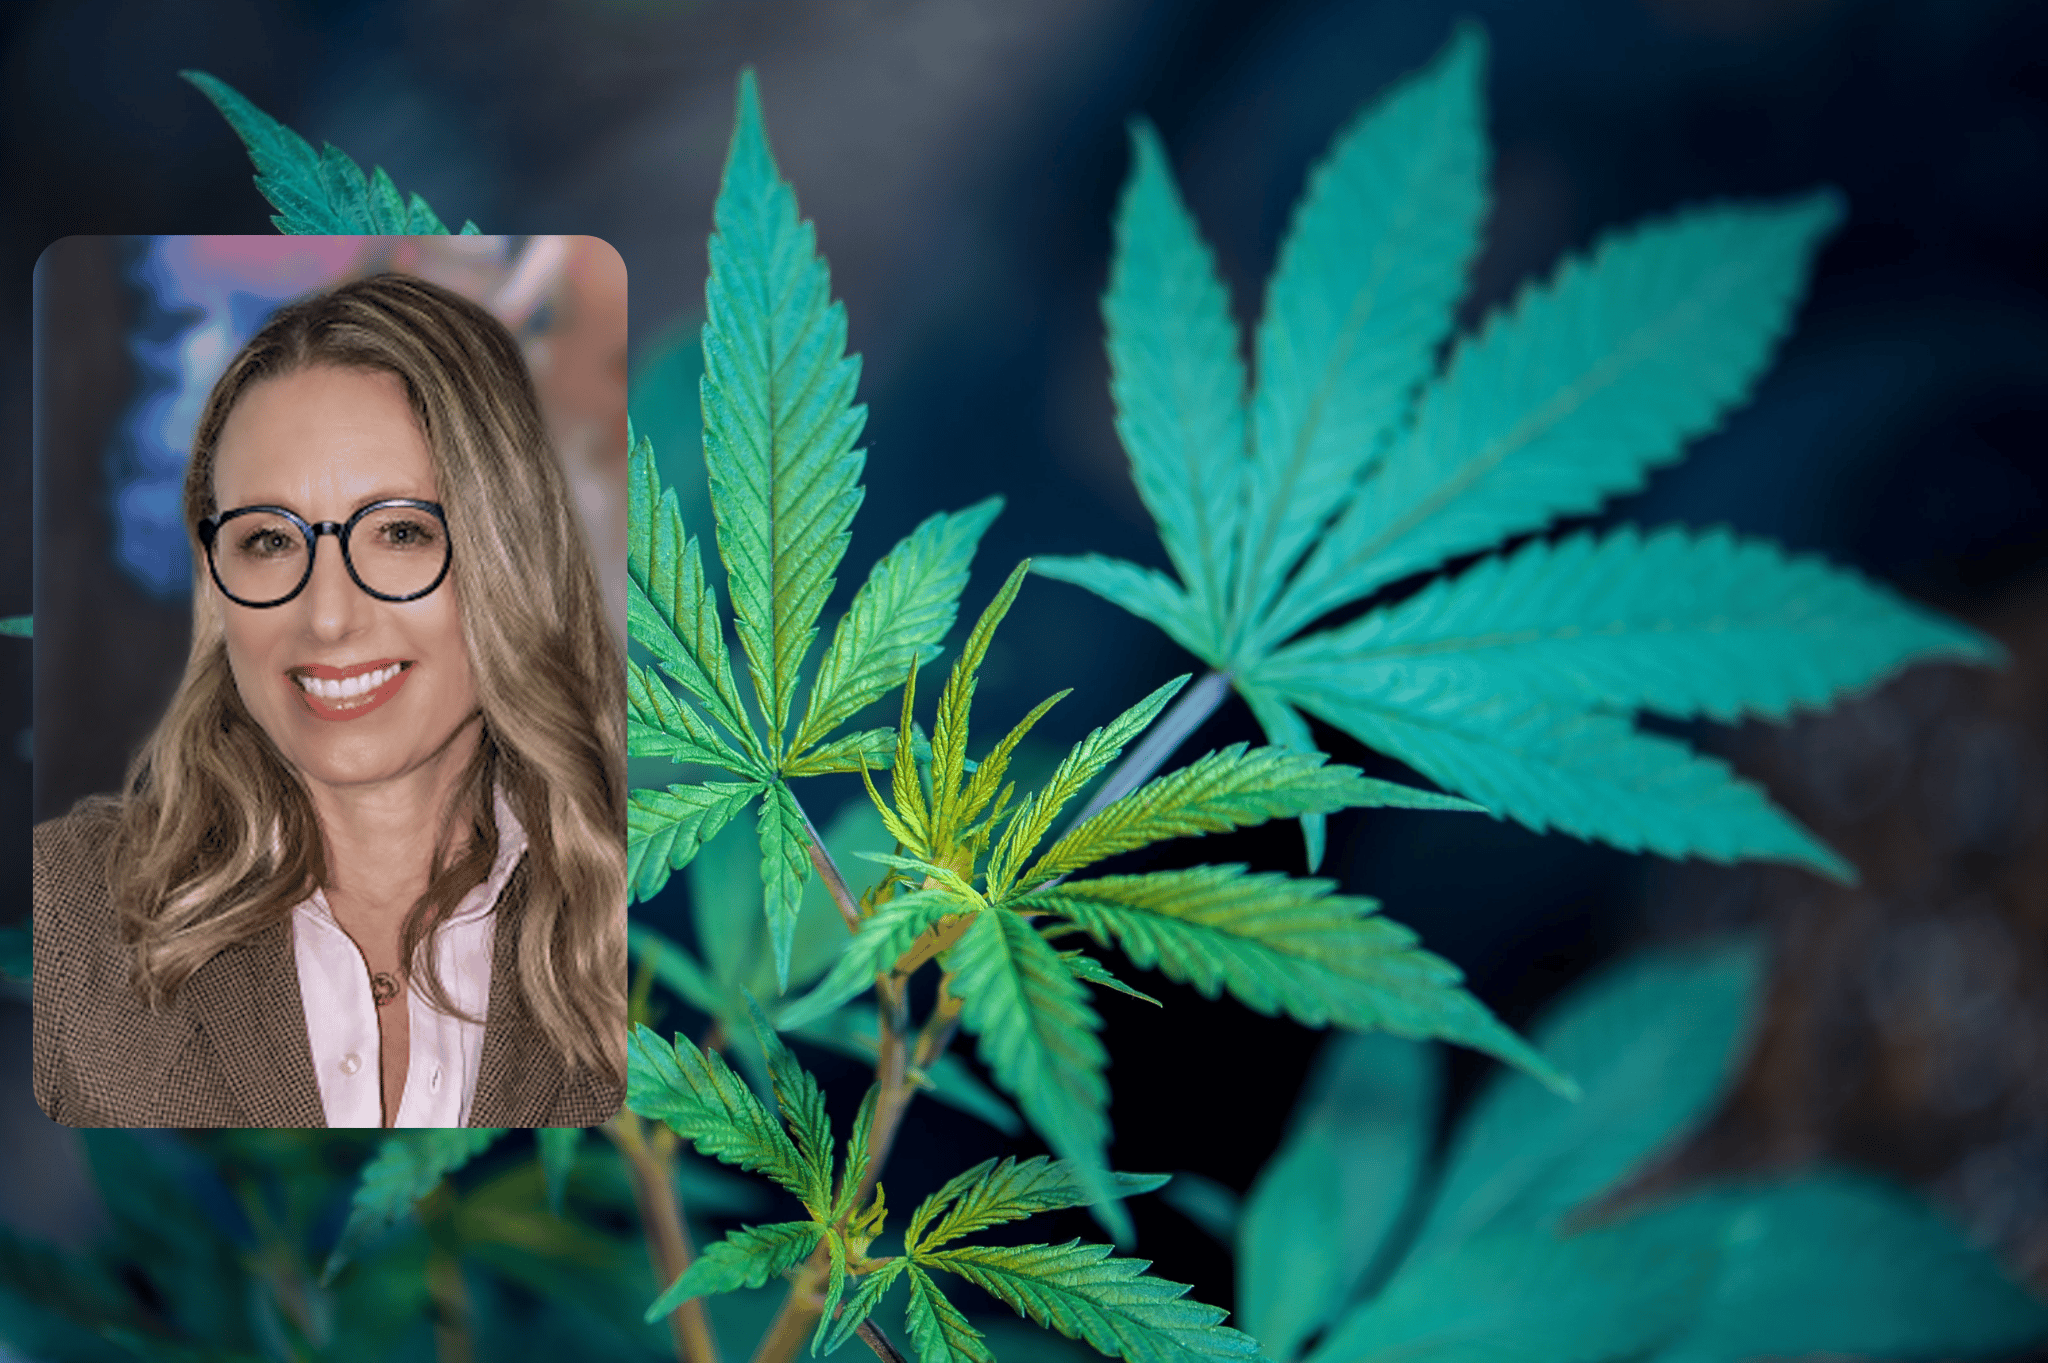 Mariella Dimech, now former chair of the Cannabis Authority, says her job was terminated